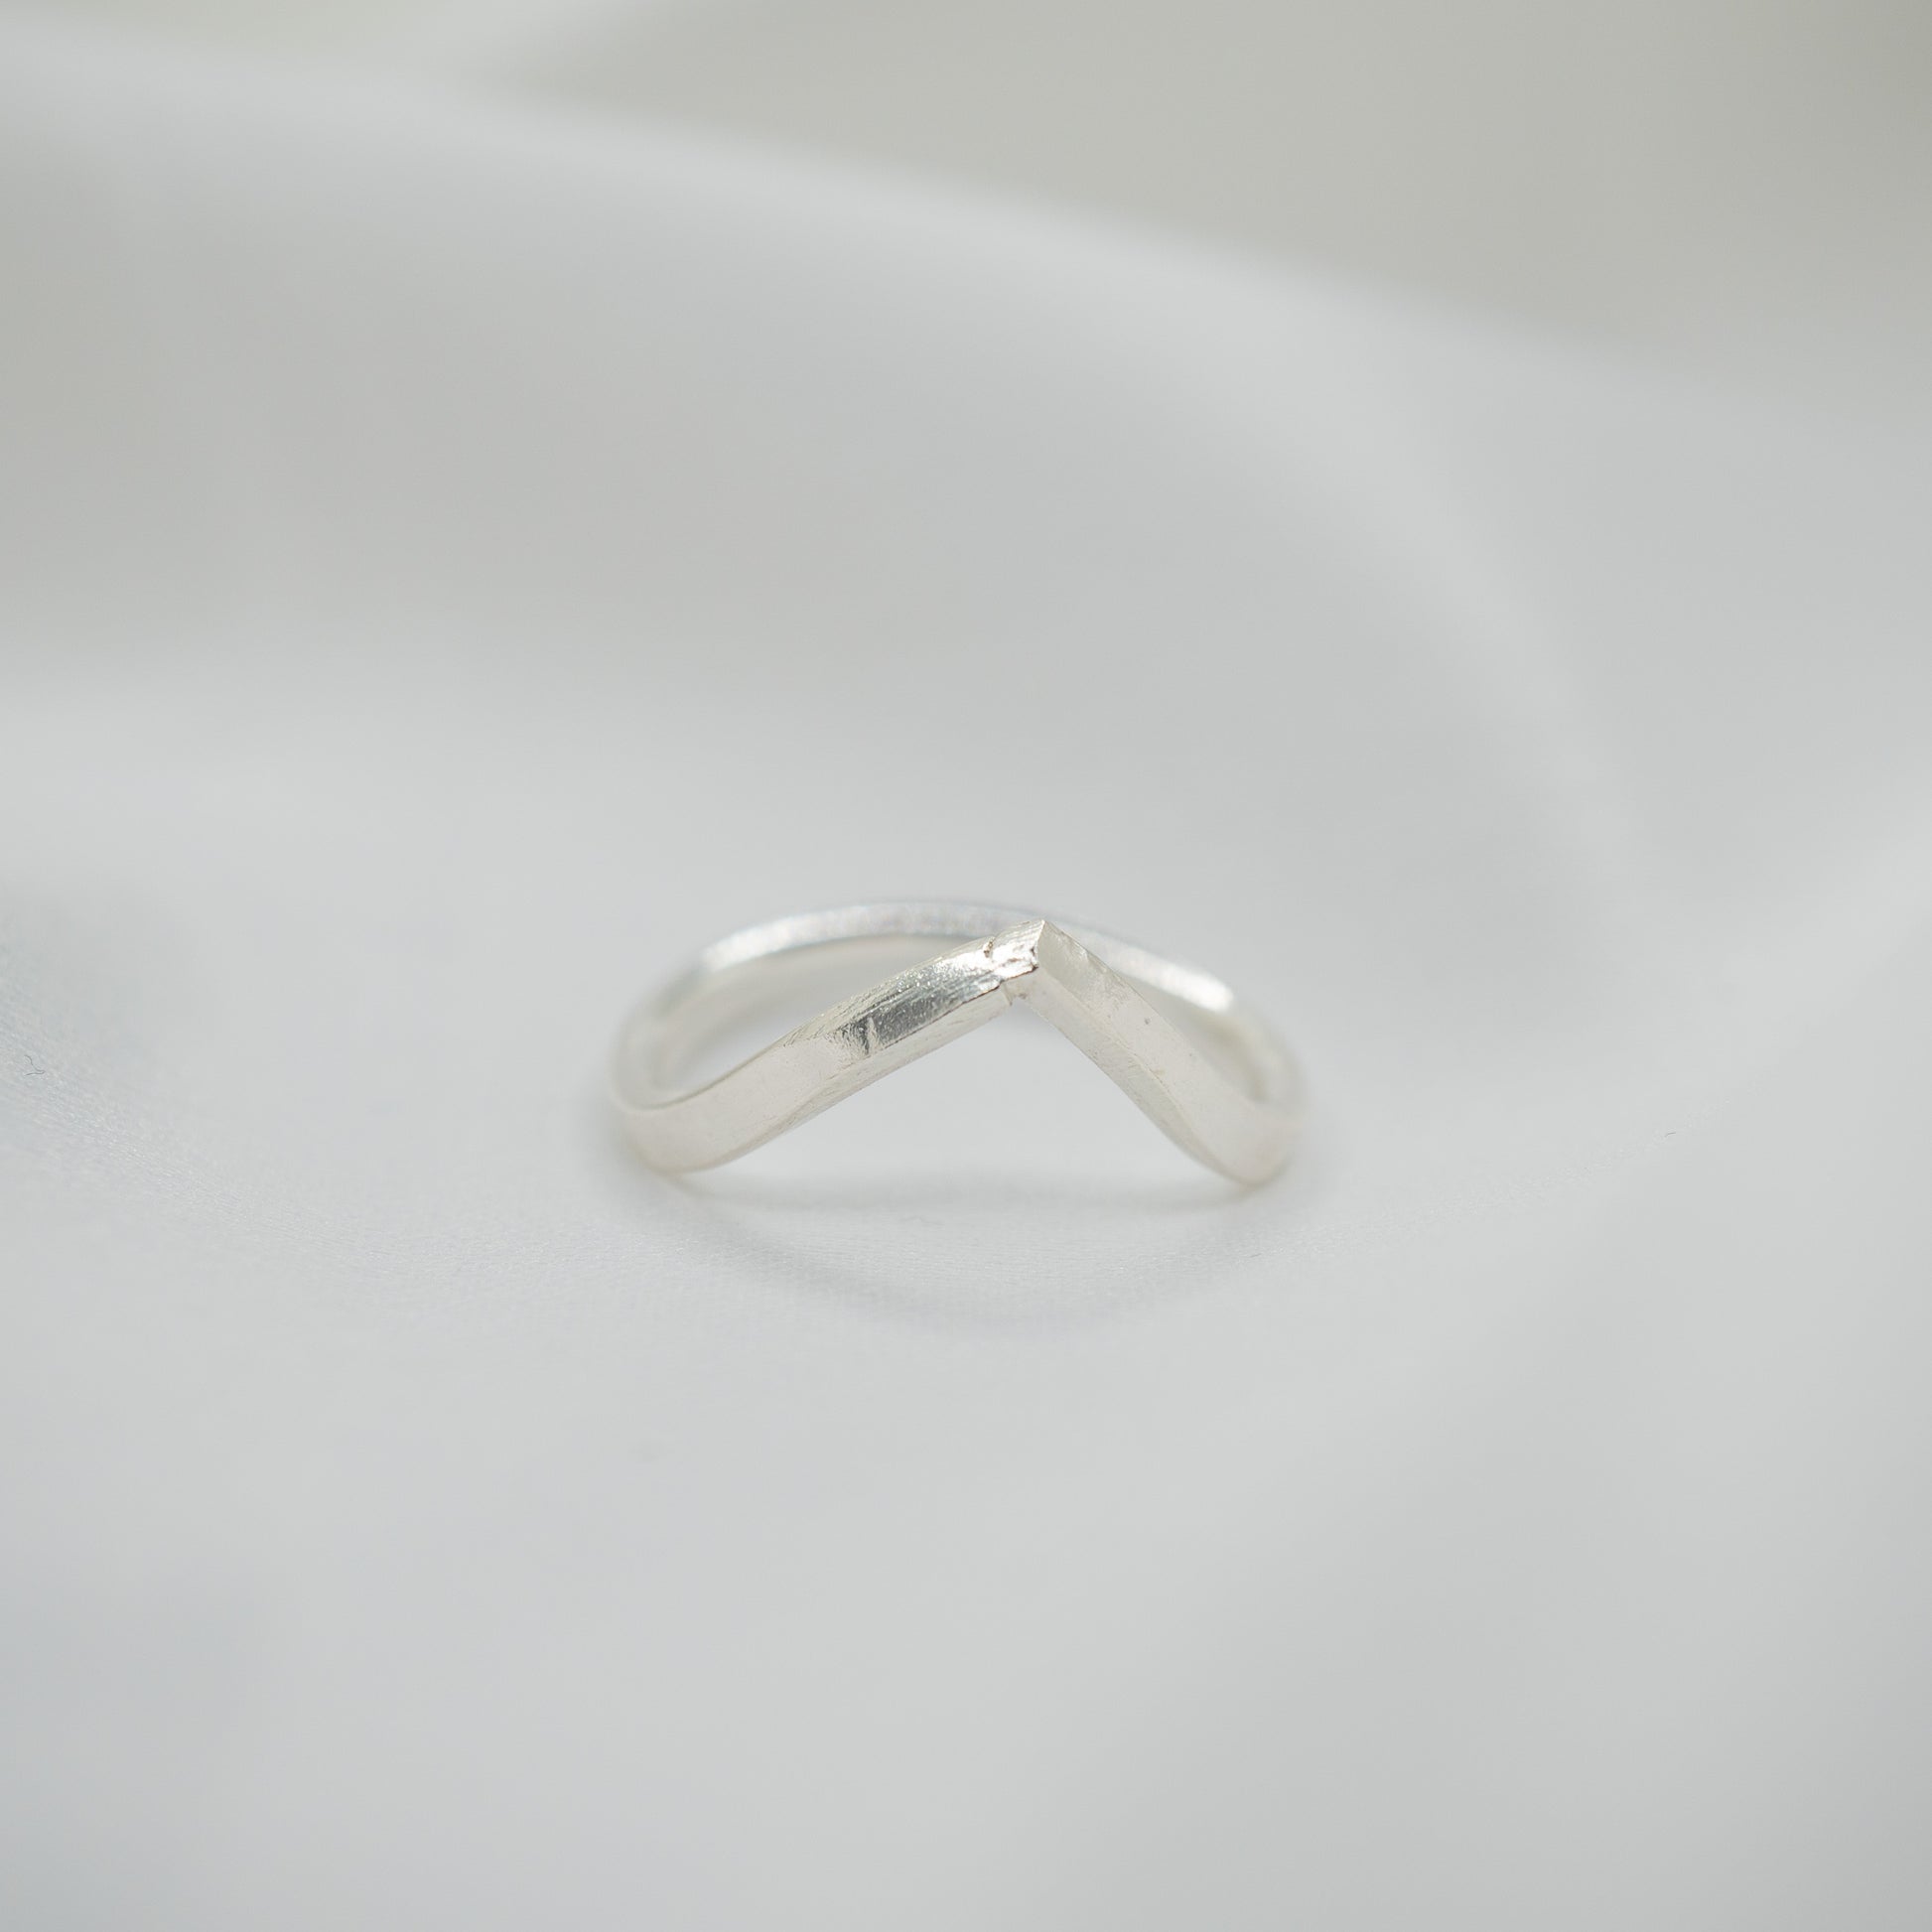 Sterling Silver Chevron Ring - shot on white - front view